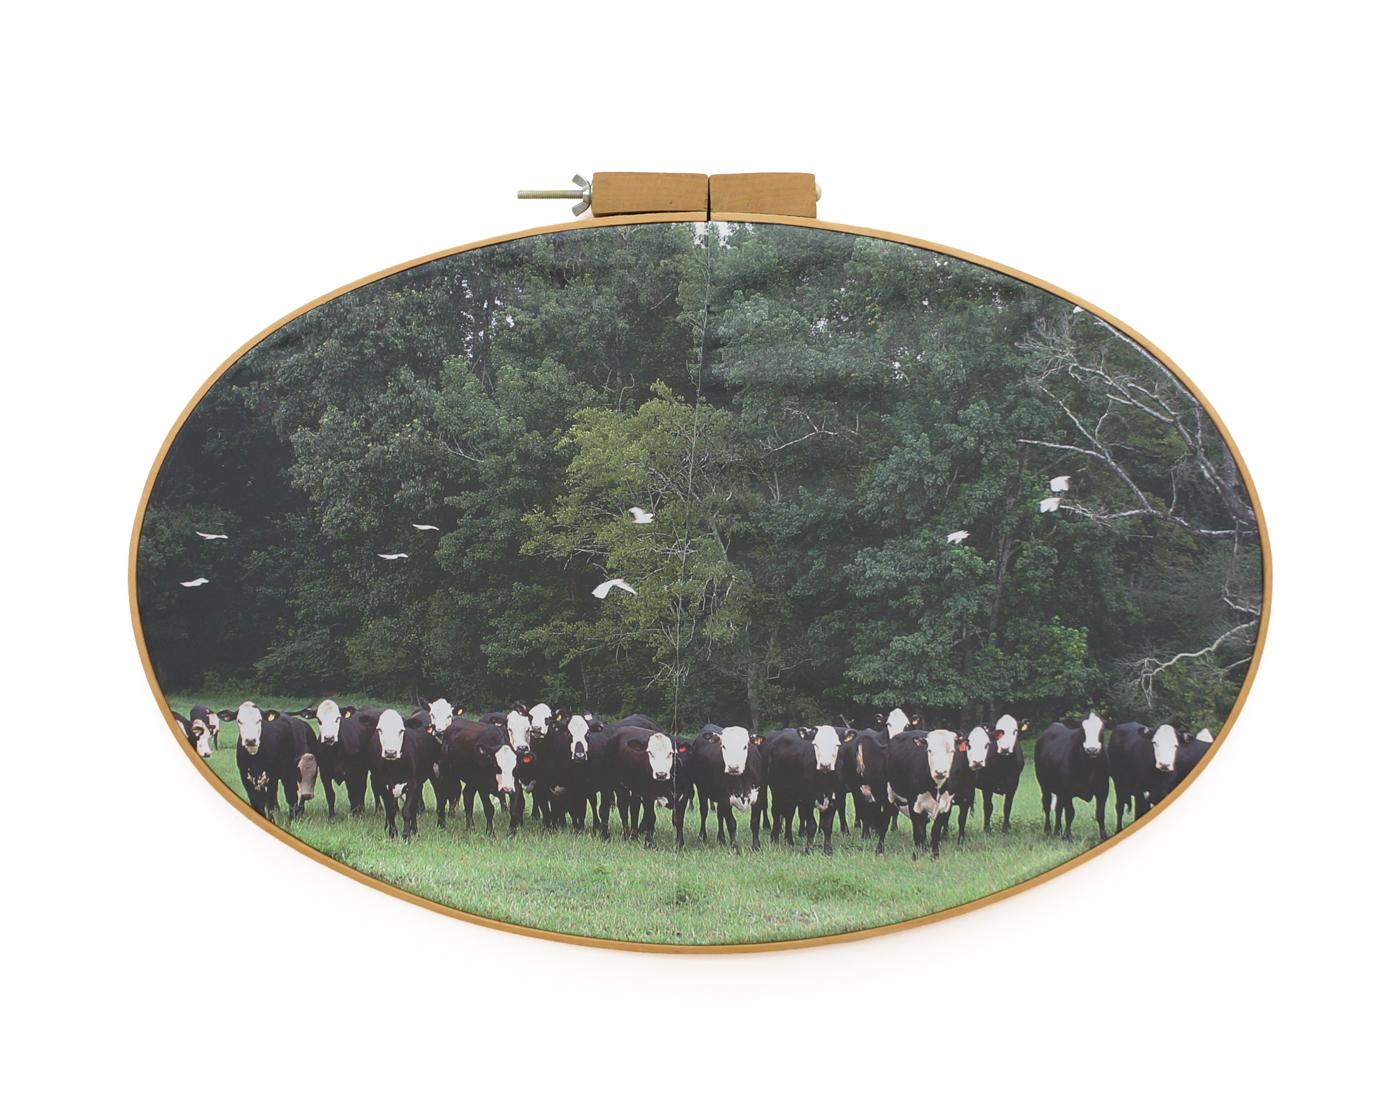 Letitia Huckaby Figurative Photograph - Dixon Correctional Institute - Black & white cows on fabric in embroidery hoop